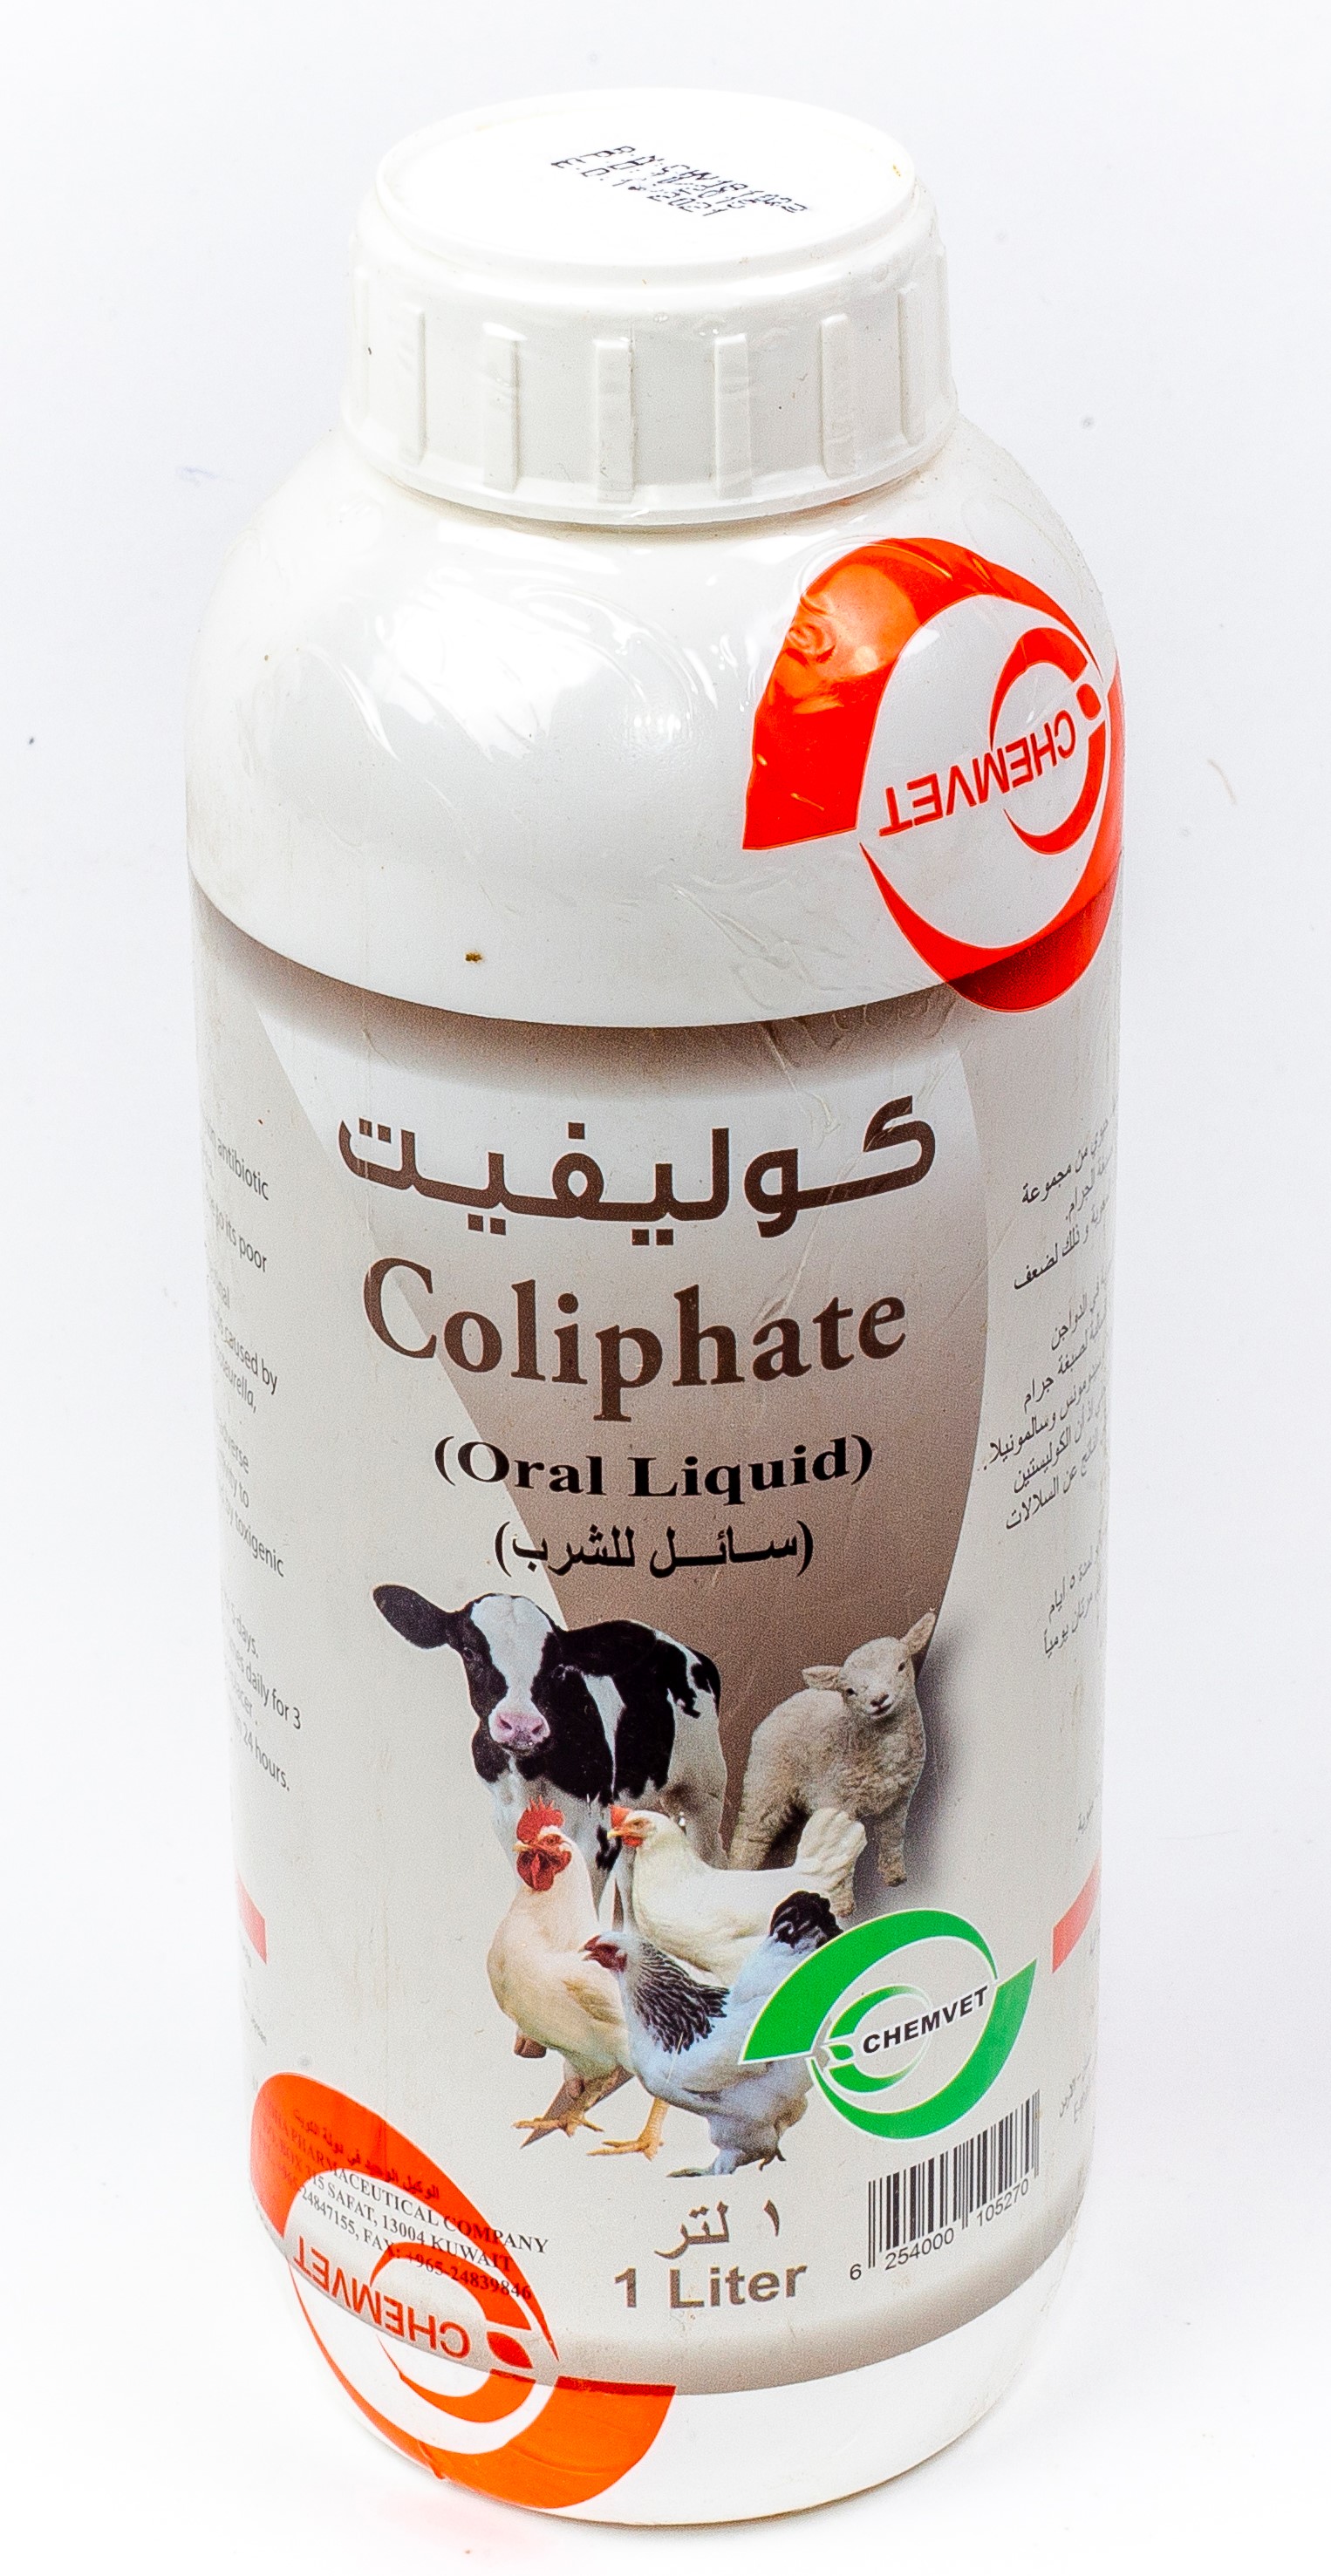 Coliphate WSP